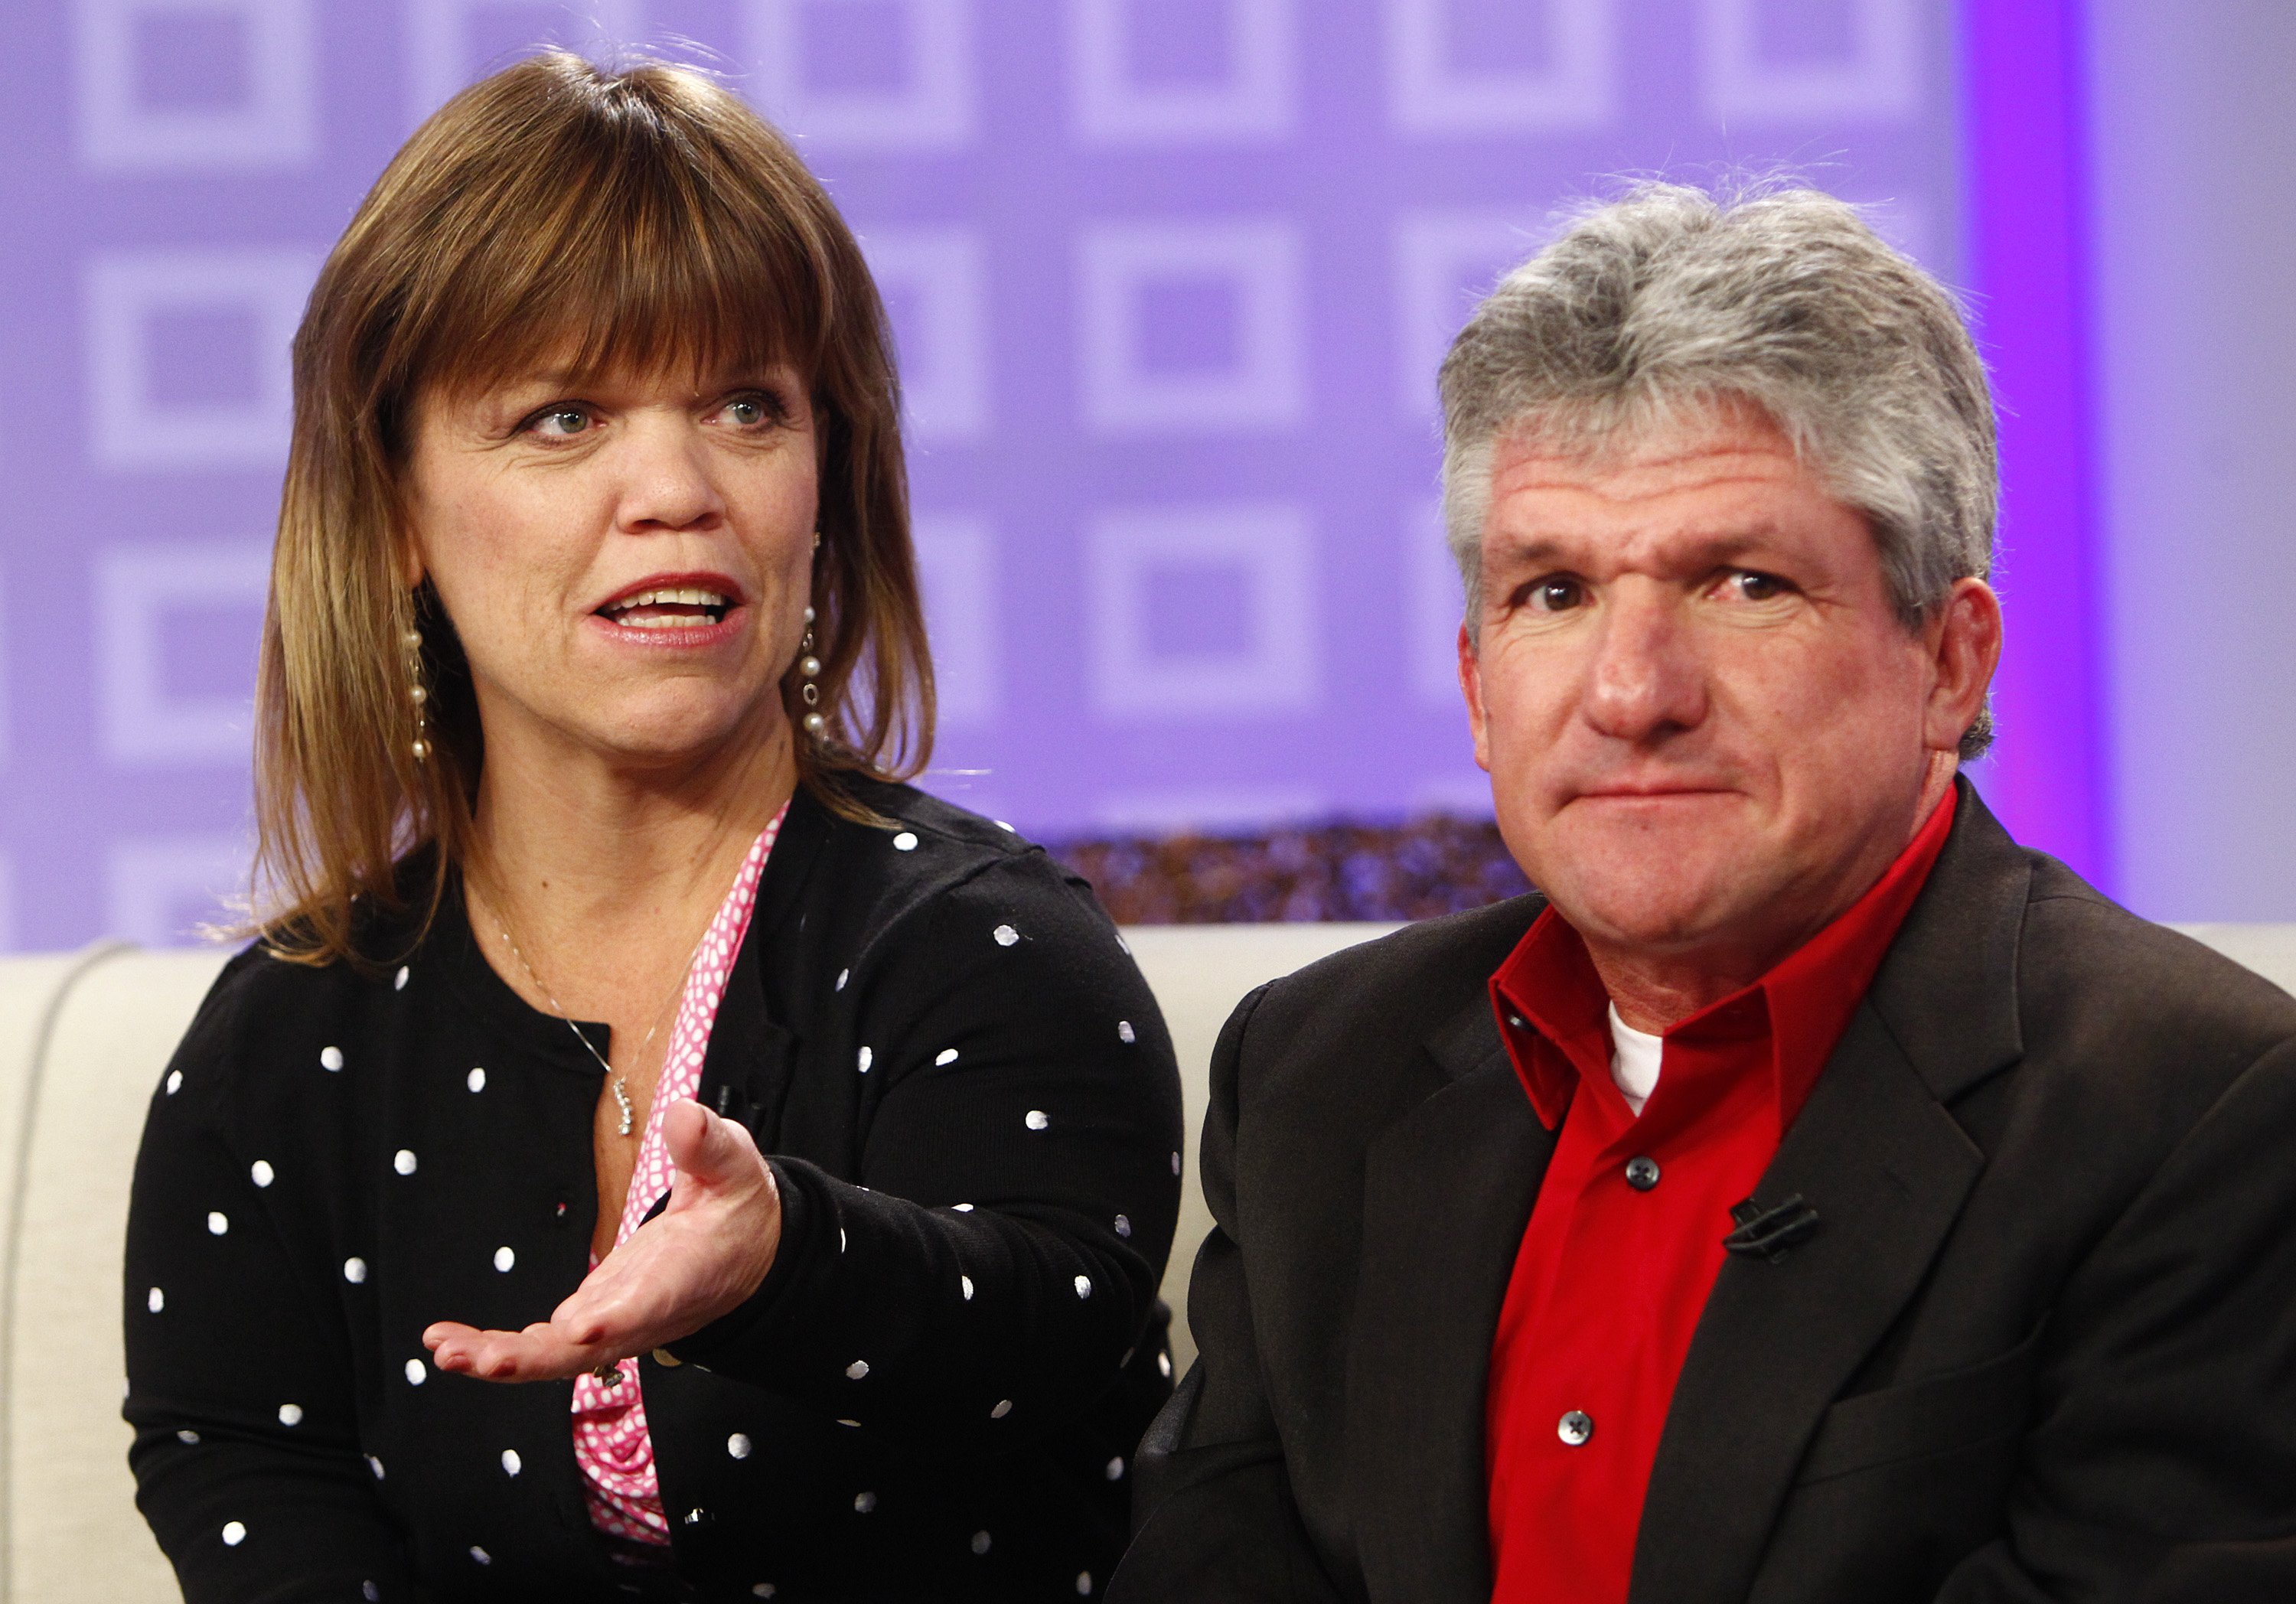 Amy Roloff and Matt Roloff appear on NBC News' "Today" show, Feb 2012 | Photo: Getty Images